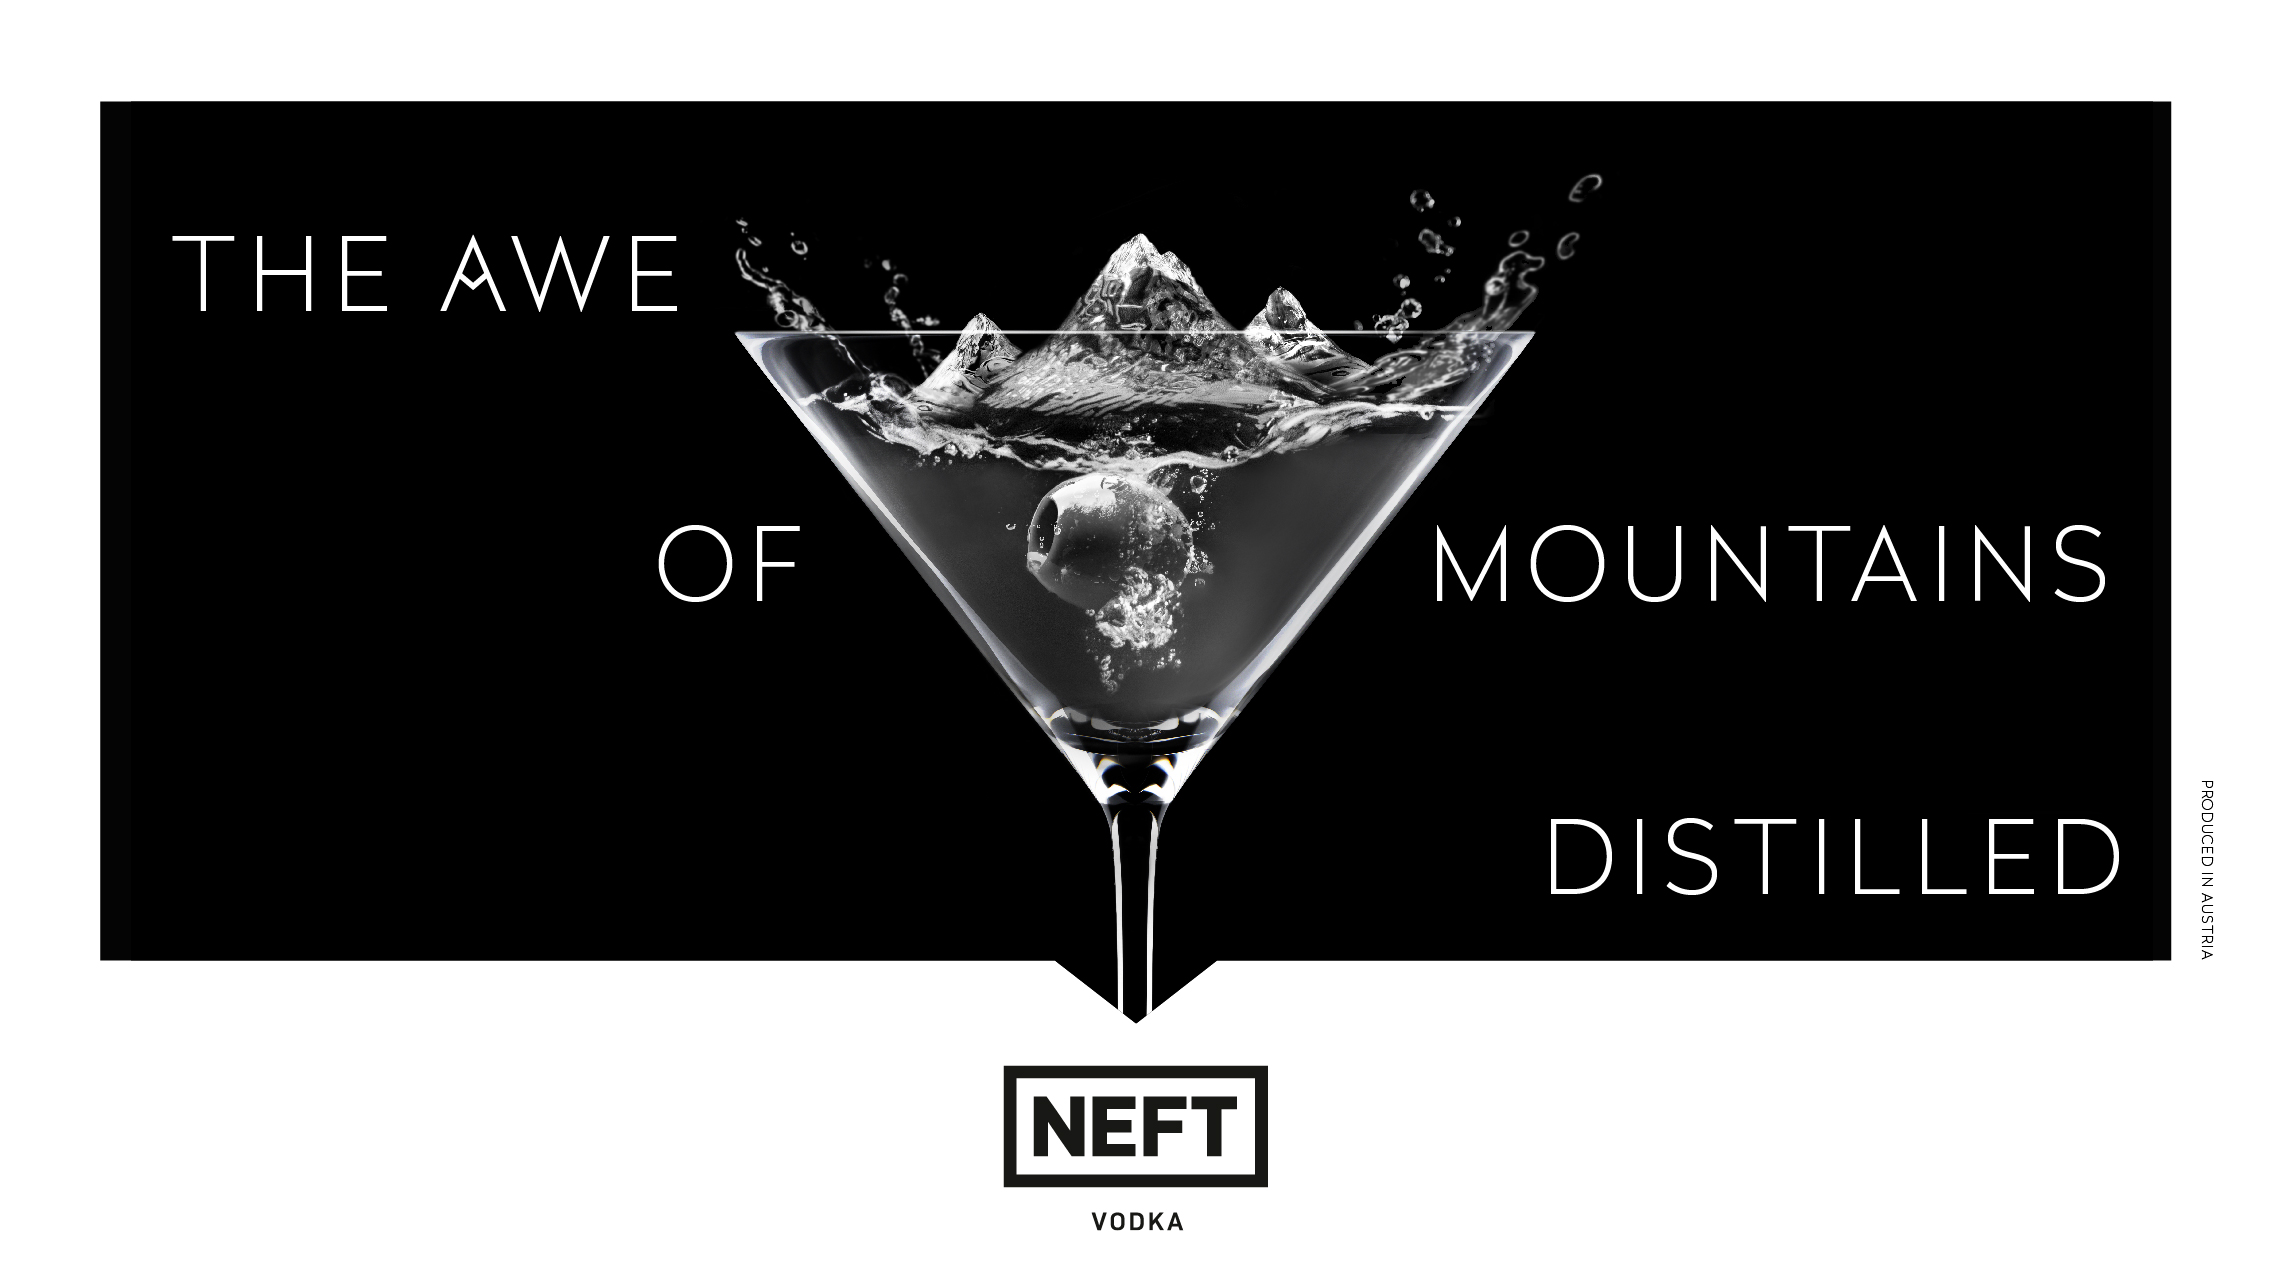 Vodka Brand NEFT Conjures Up ‘the Awe of Mountains Distilled’ in Premium Rebrand by WMH&I